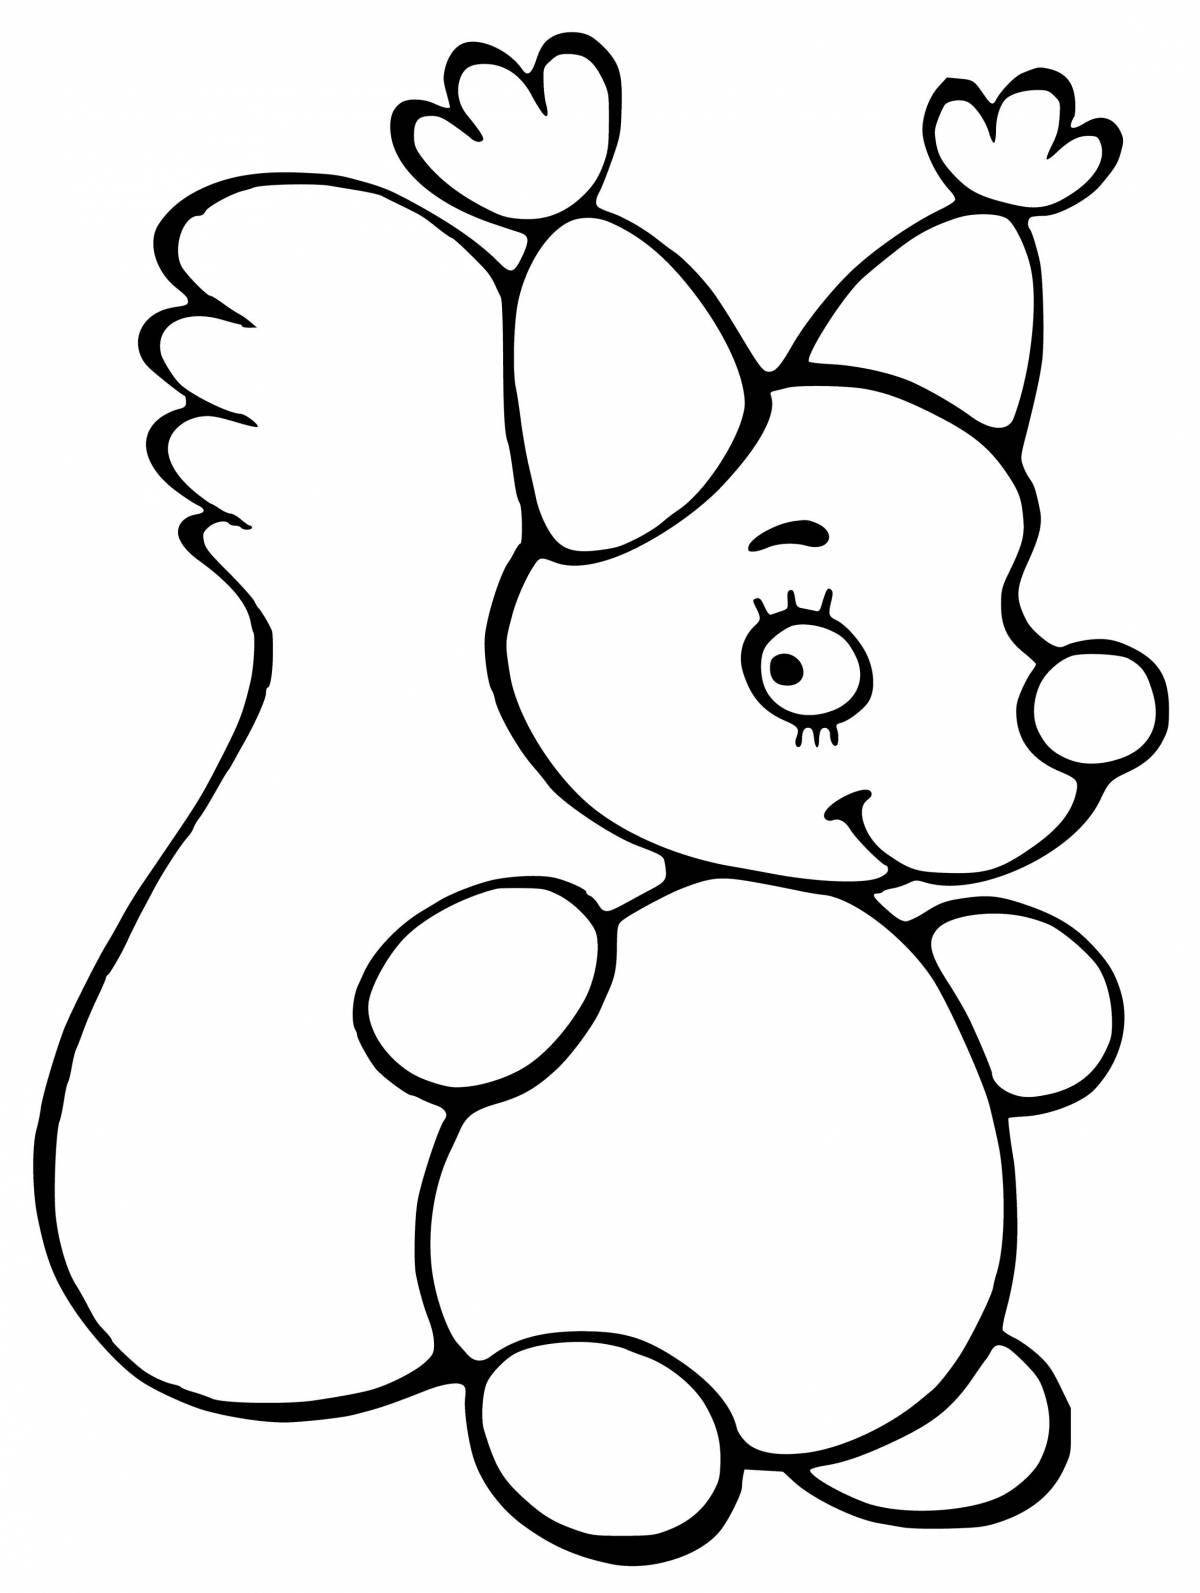 Coloring game for kids 2-3 years old